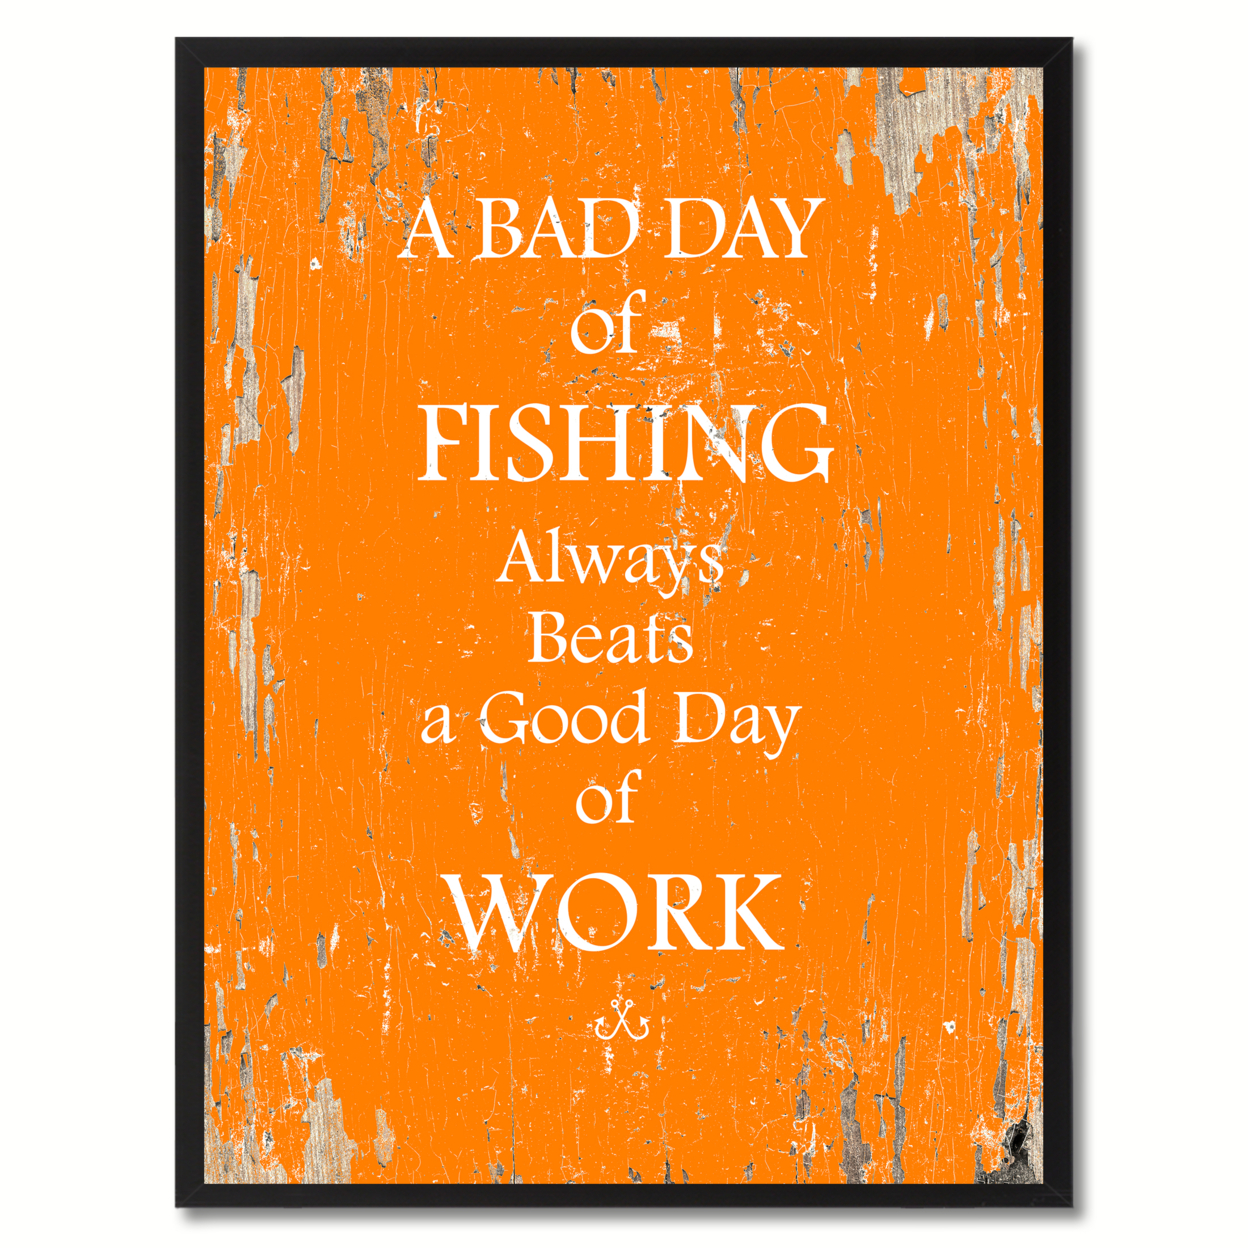 A Bad Day Of Fishing Always Beats A Good Day Of Work Saying Canvas Print with Picture Frame Home Decor Wall Art Gifts - 22" x 29"